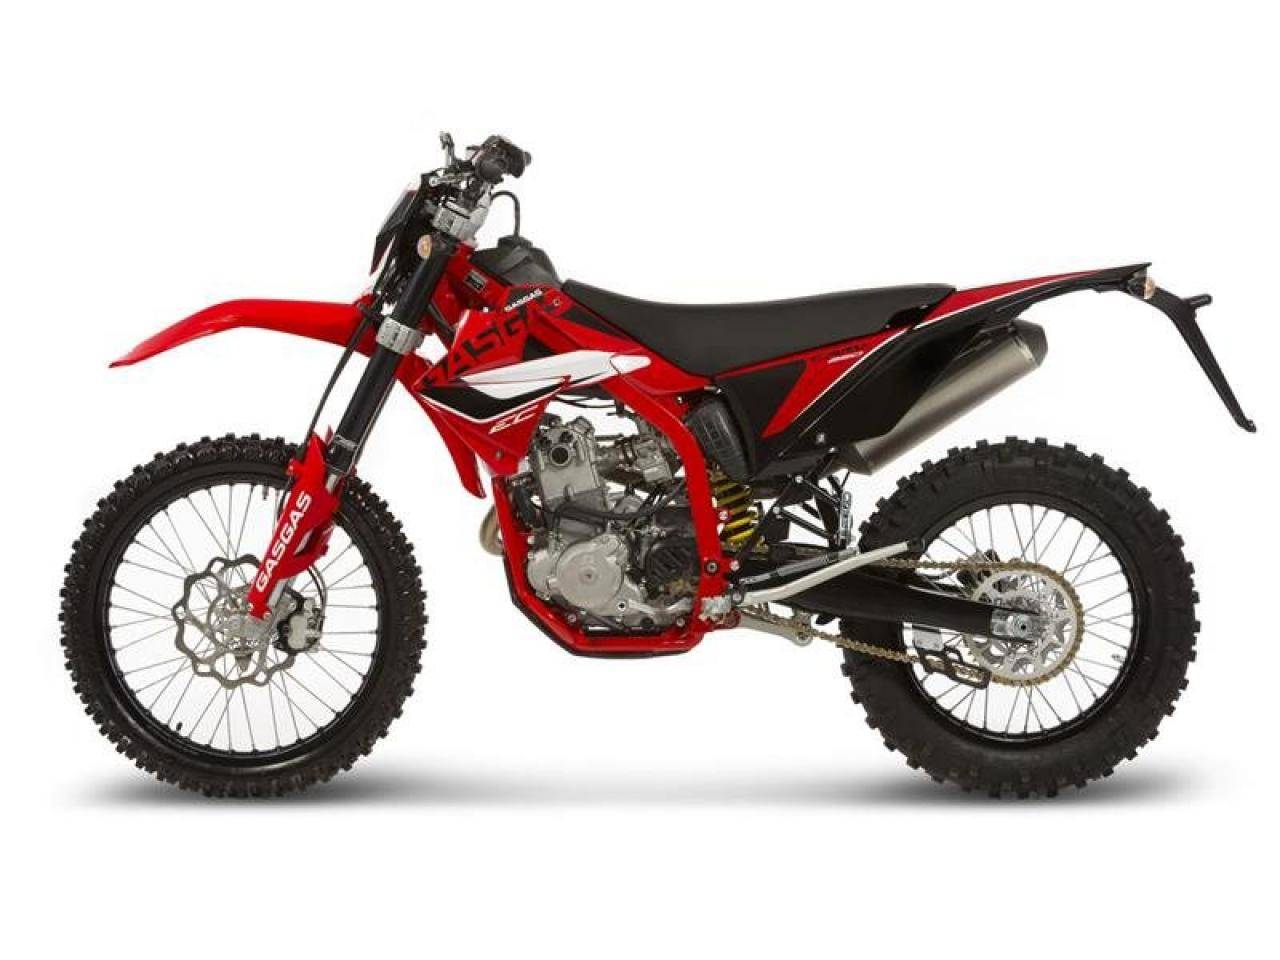 Gas gas 125 txt gp 2019 owner's manual